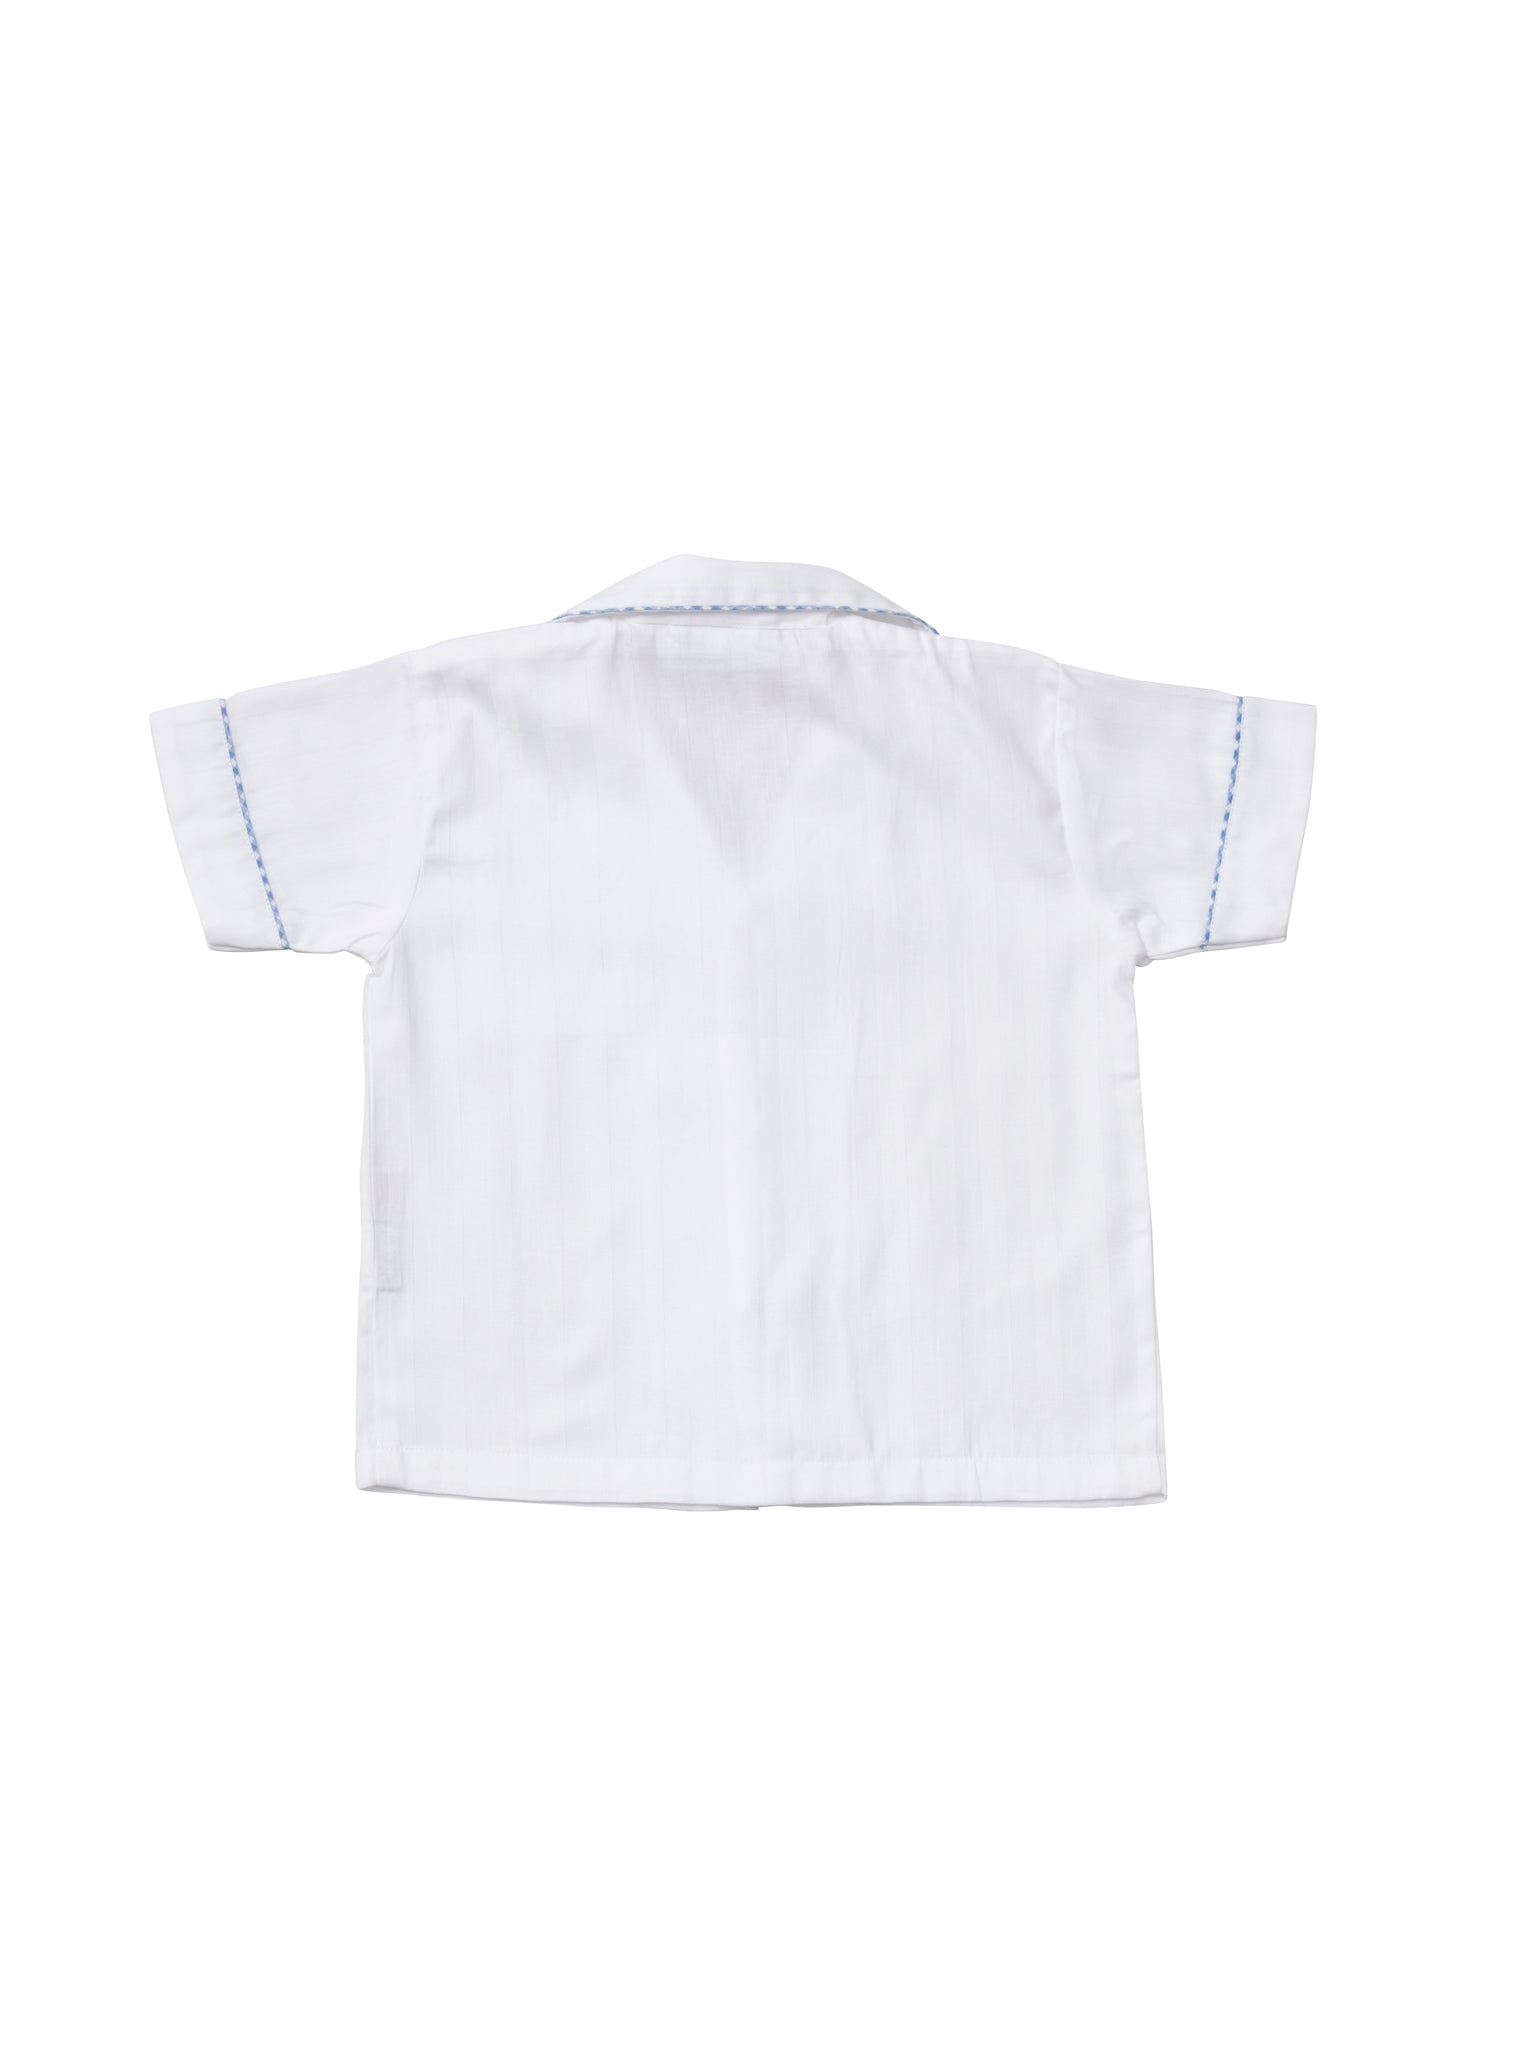 A classic white cropped pyjama set with blue gingham edging for children, from Turquaz.